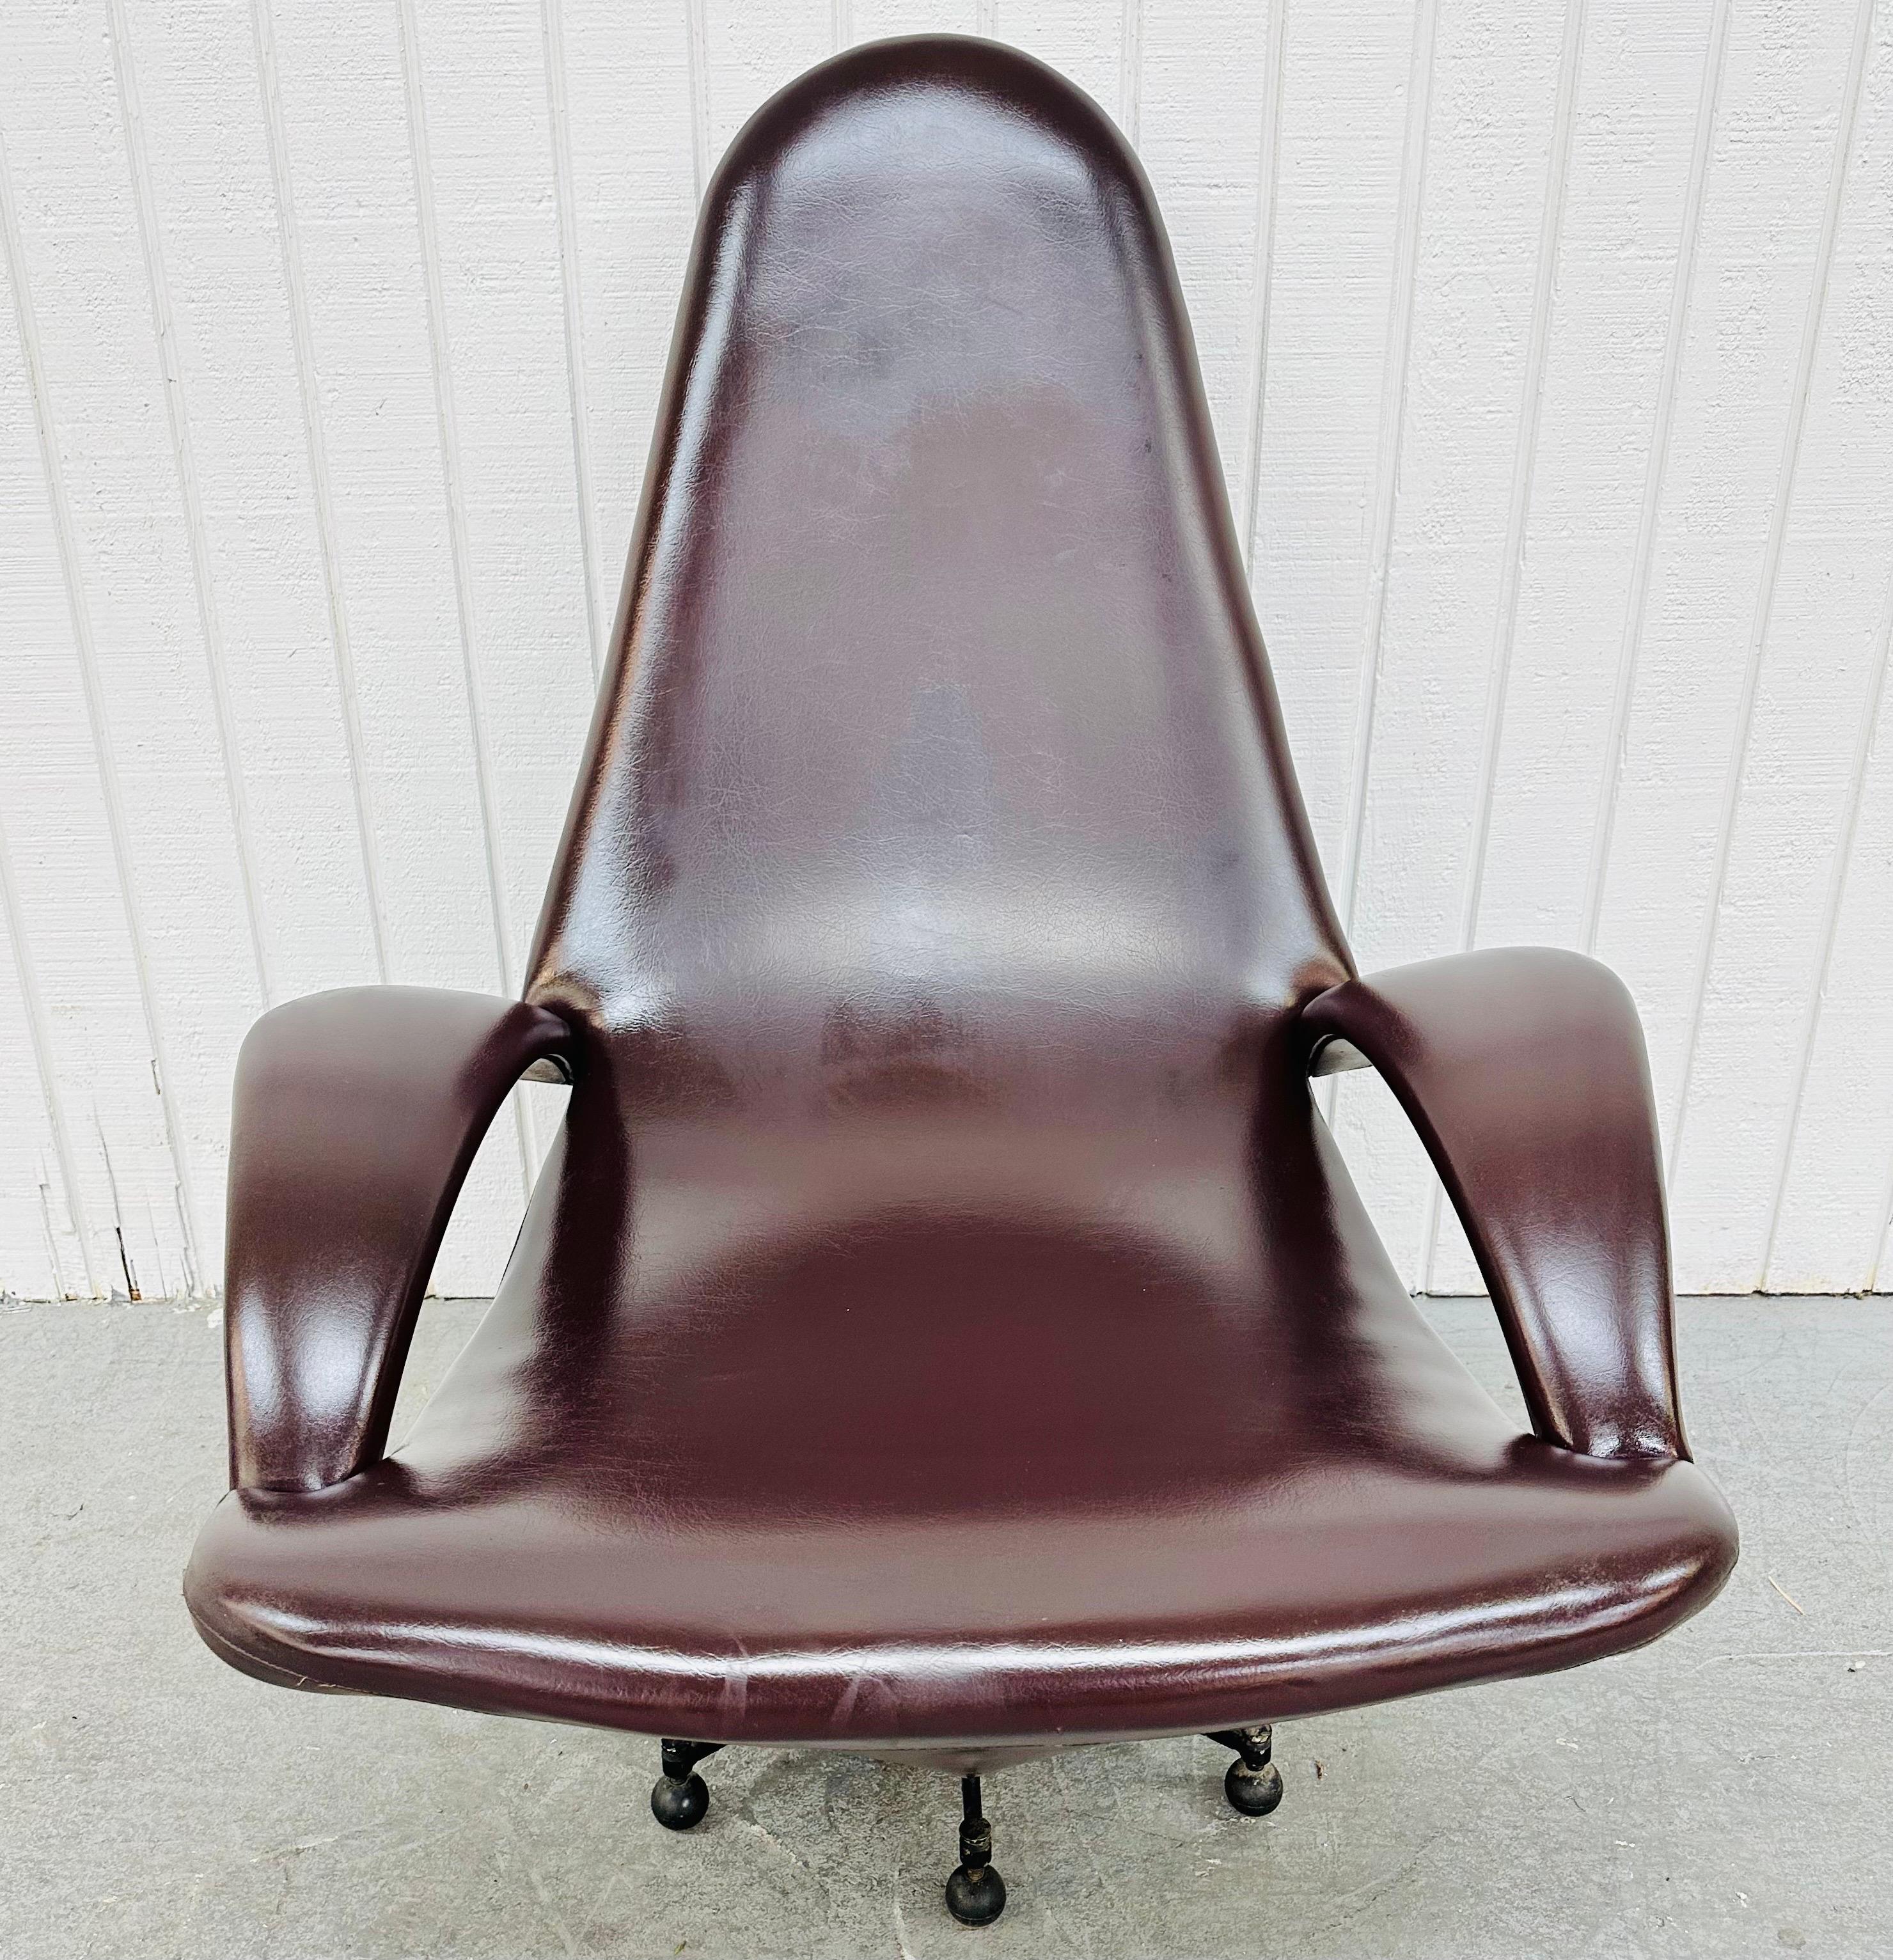 This listing is for a Mid-Century Modern Italian Lounge Chair. Featuring a low sitting design, high rounded back, curved arms, plum colored vinyl upholstery, and a black metal base. This is an exceptional combination of quality and design!